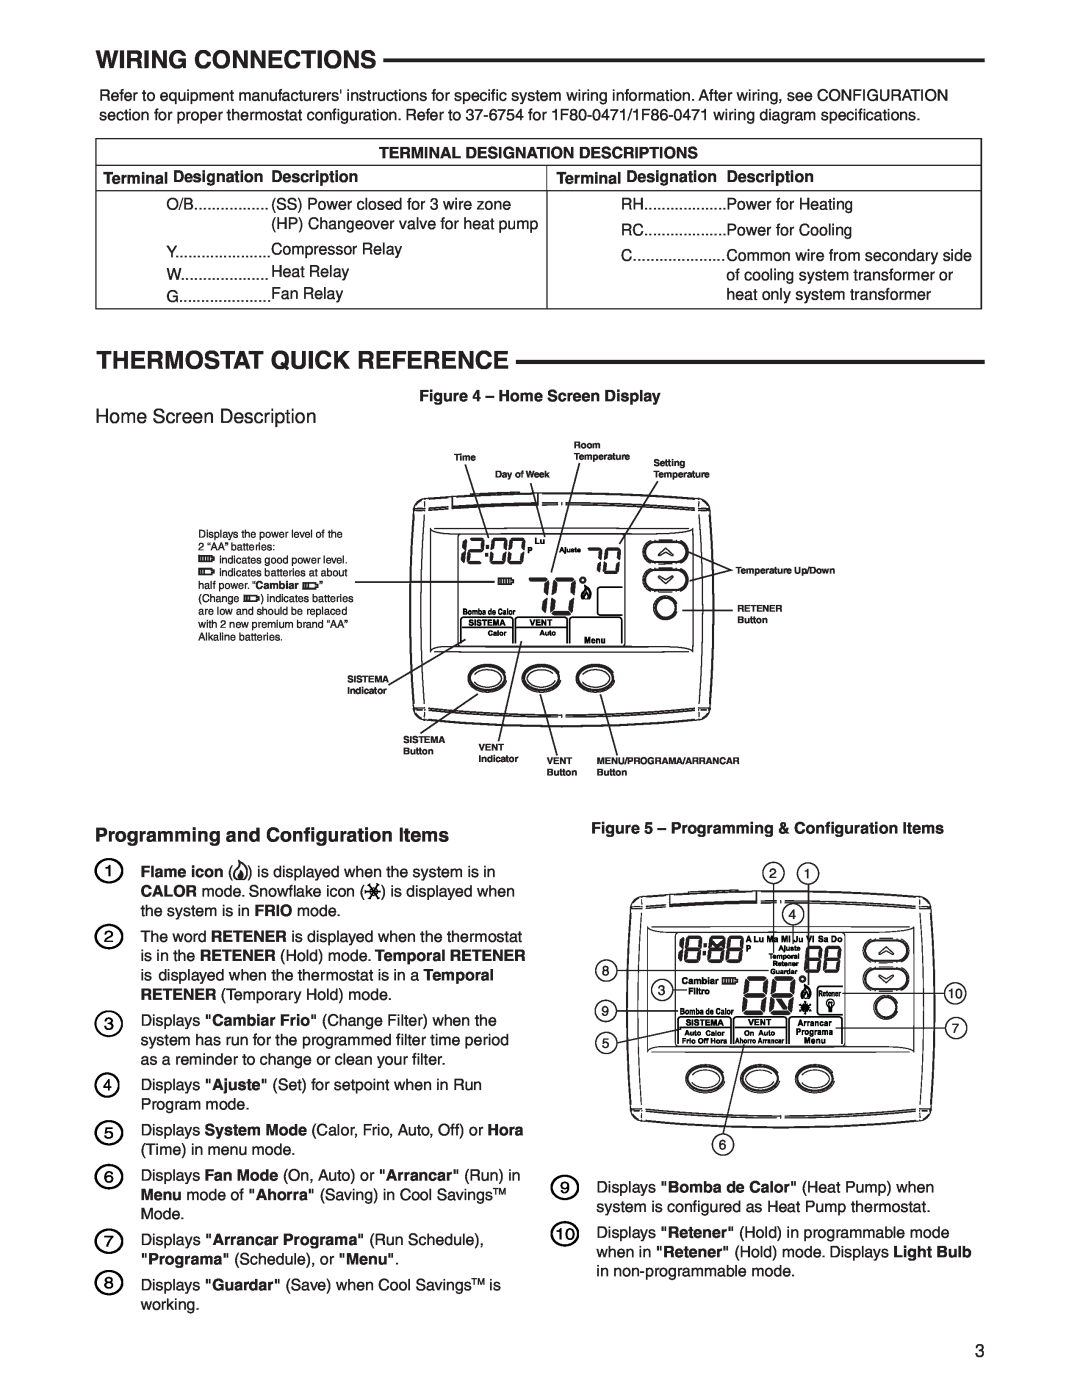 White Rodgers 1F80ST-0471 Wiring Connections, Thermostat Quick Reference, Programming and Conﬁguration Items, Description 